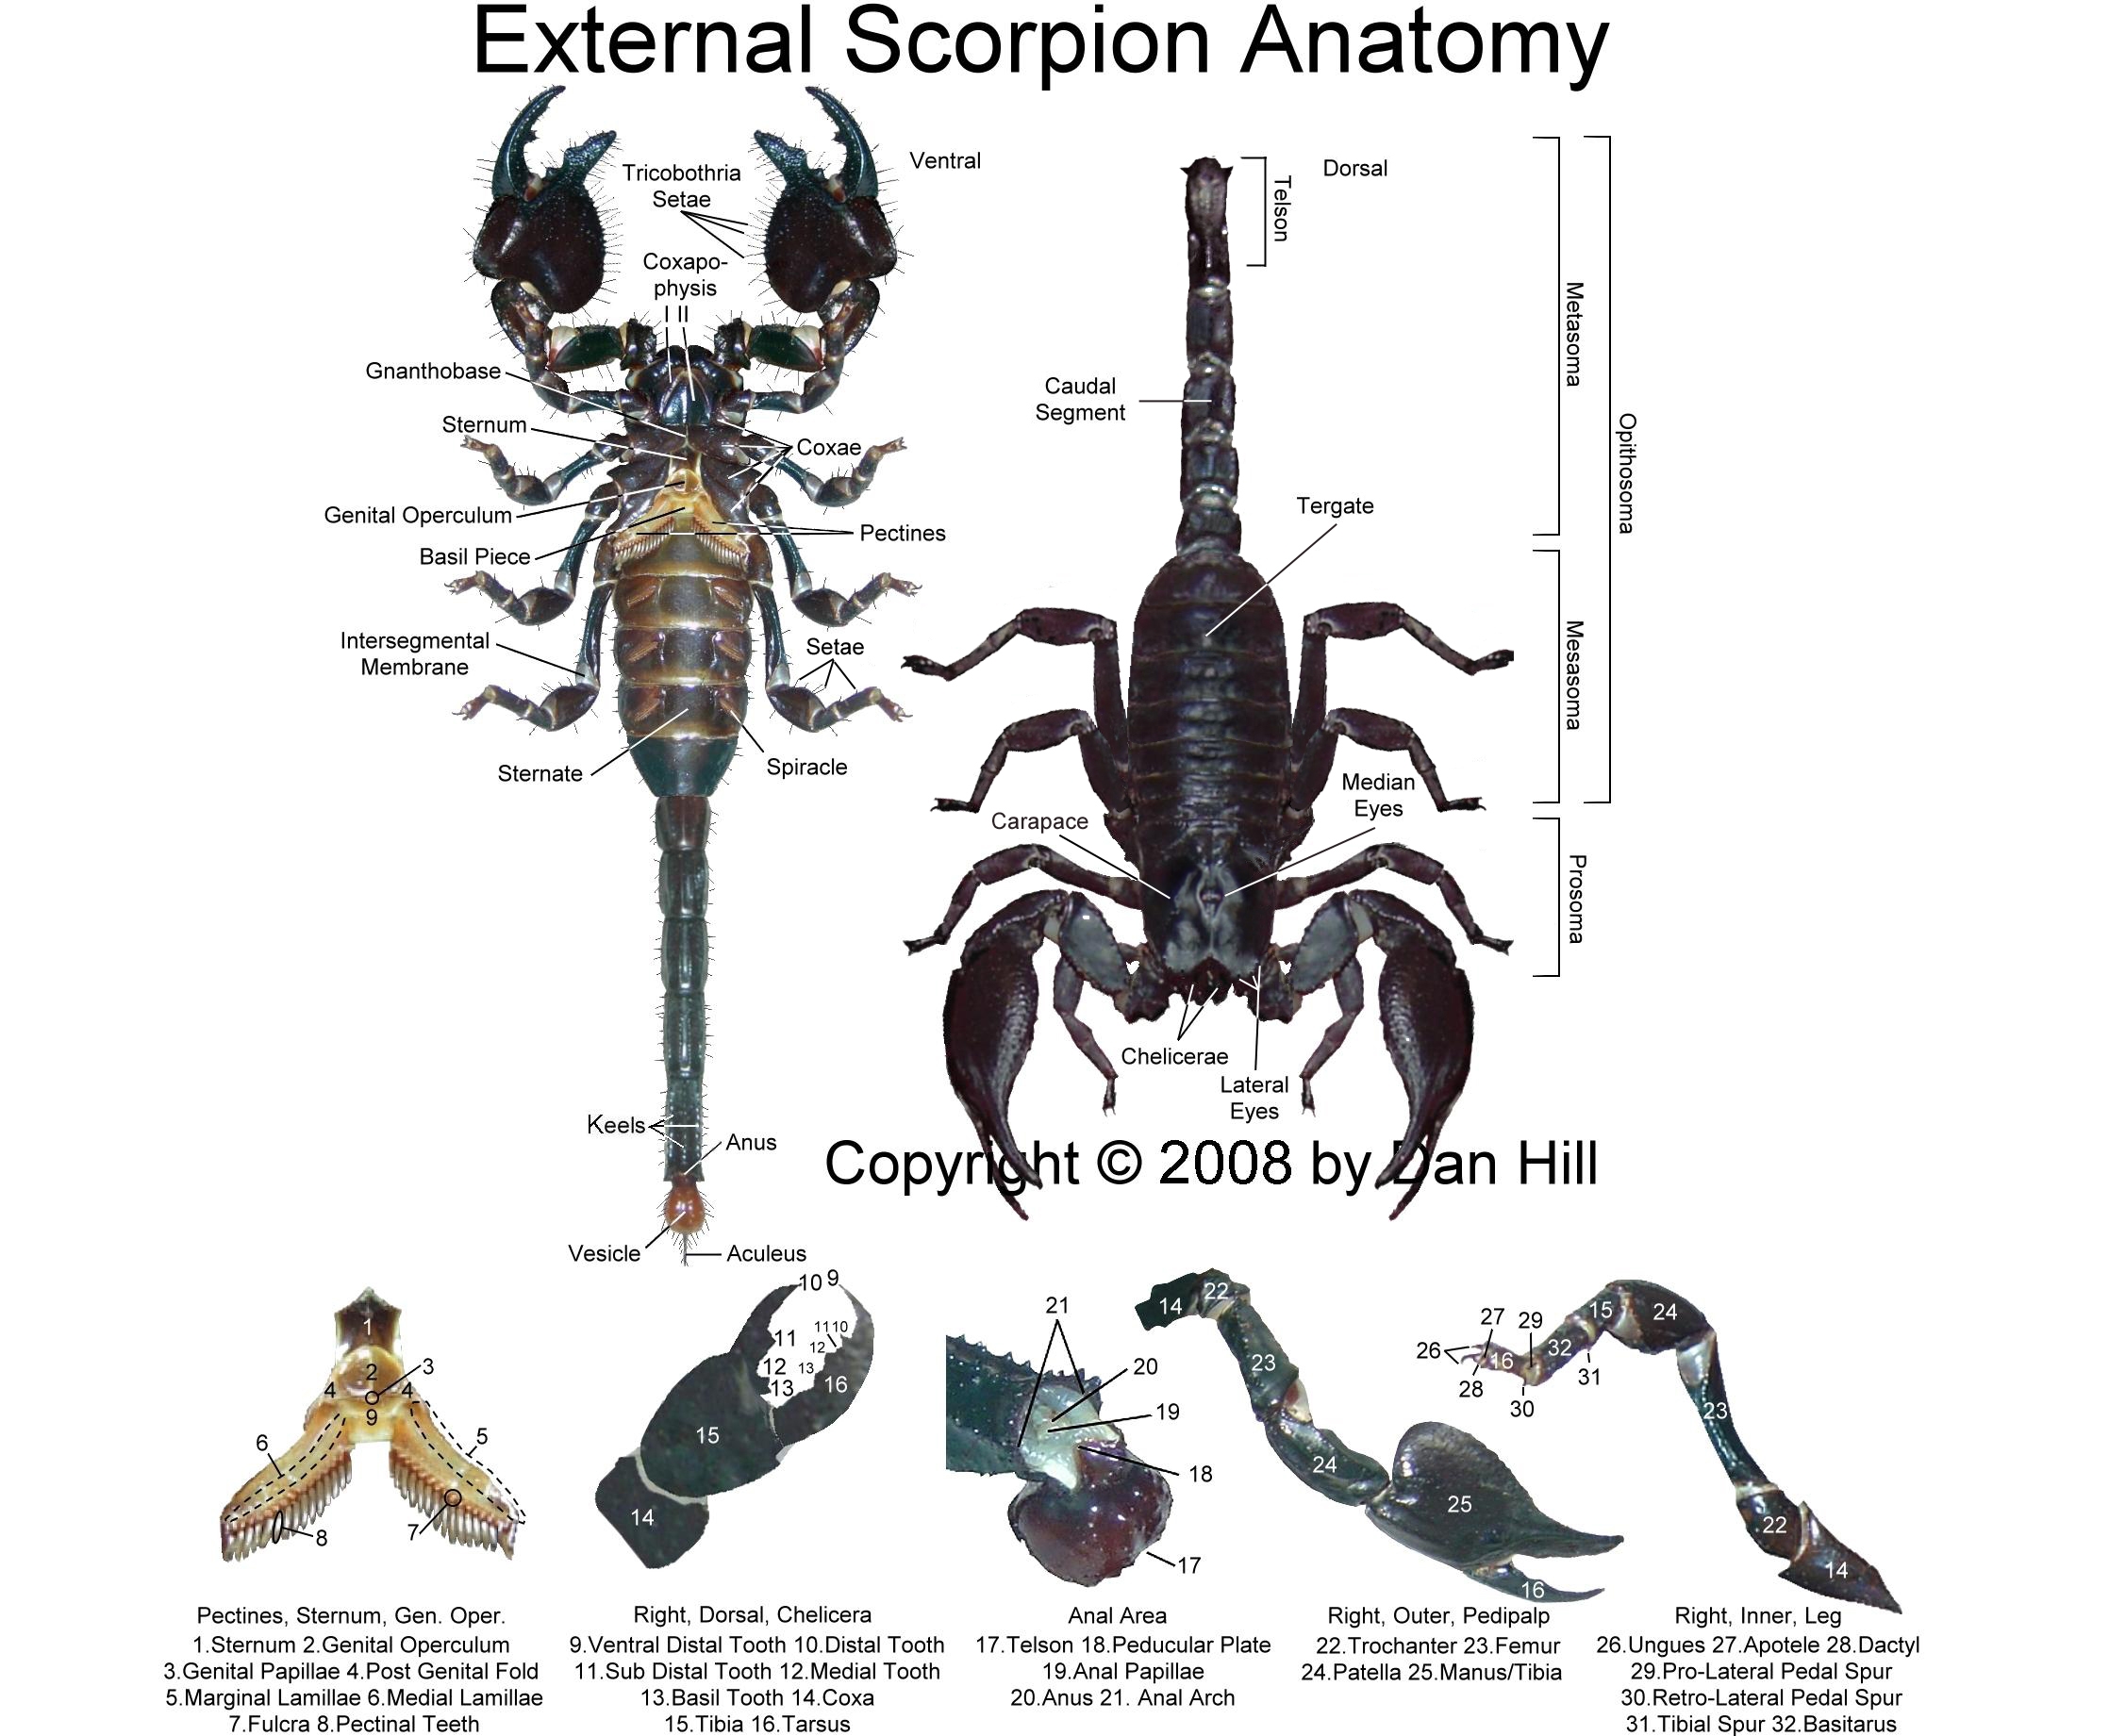 The Scorpion Files - Frequently Asked Questions (FAQ)